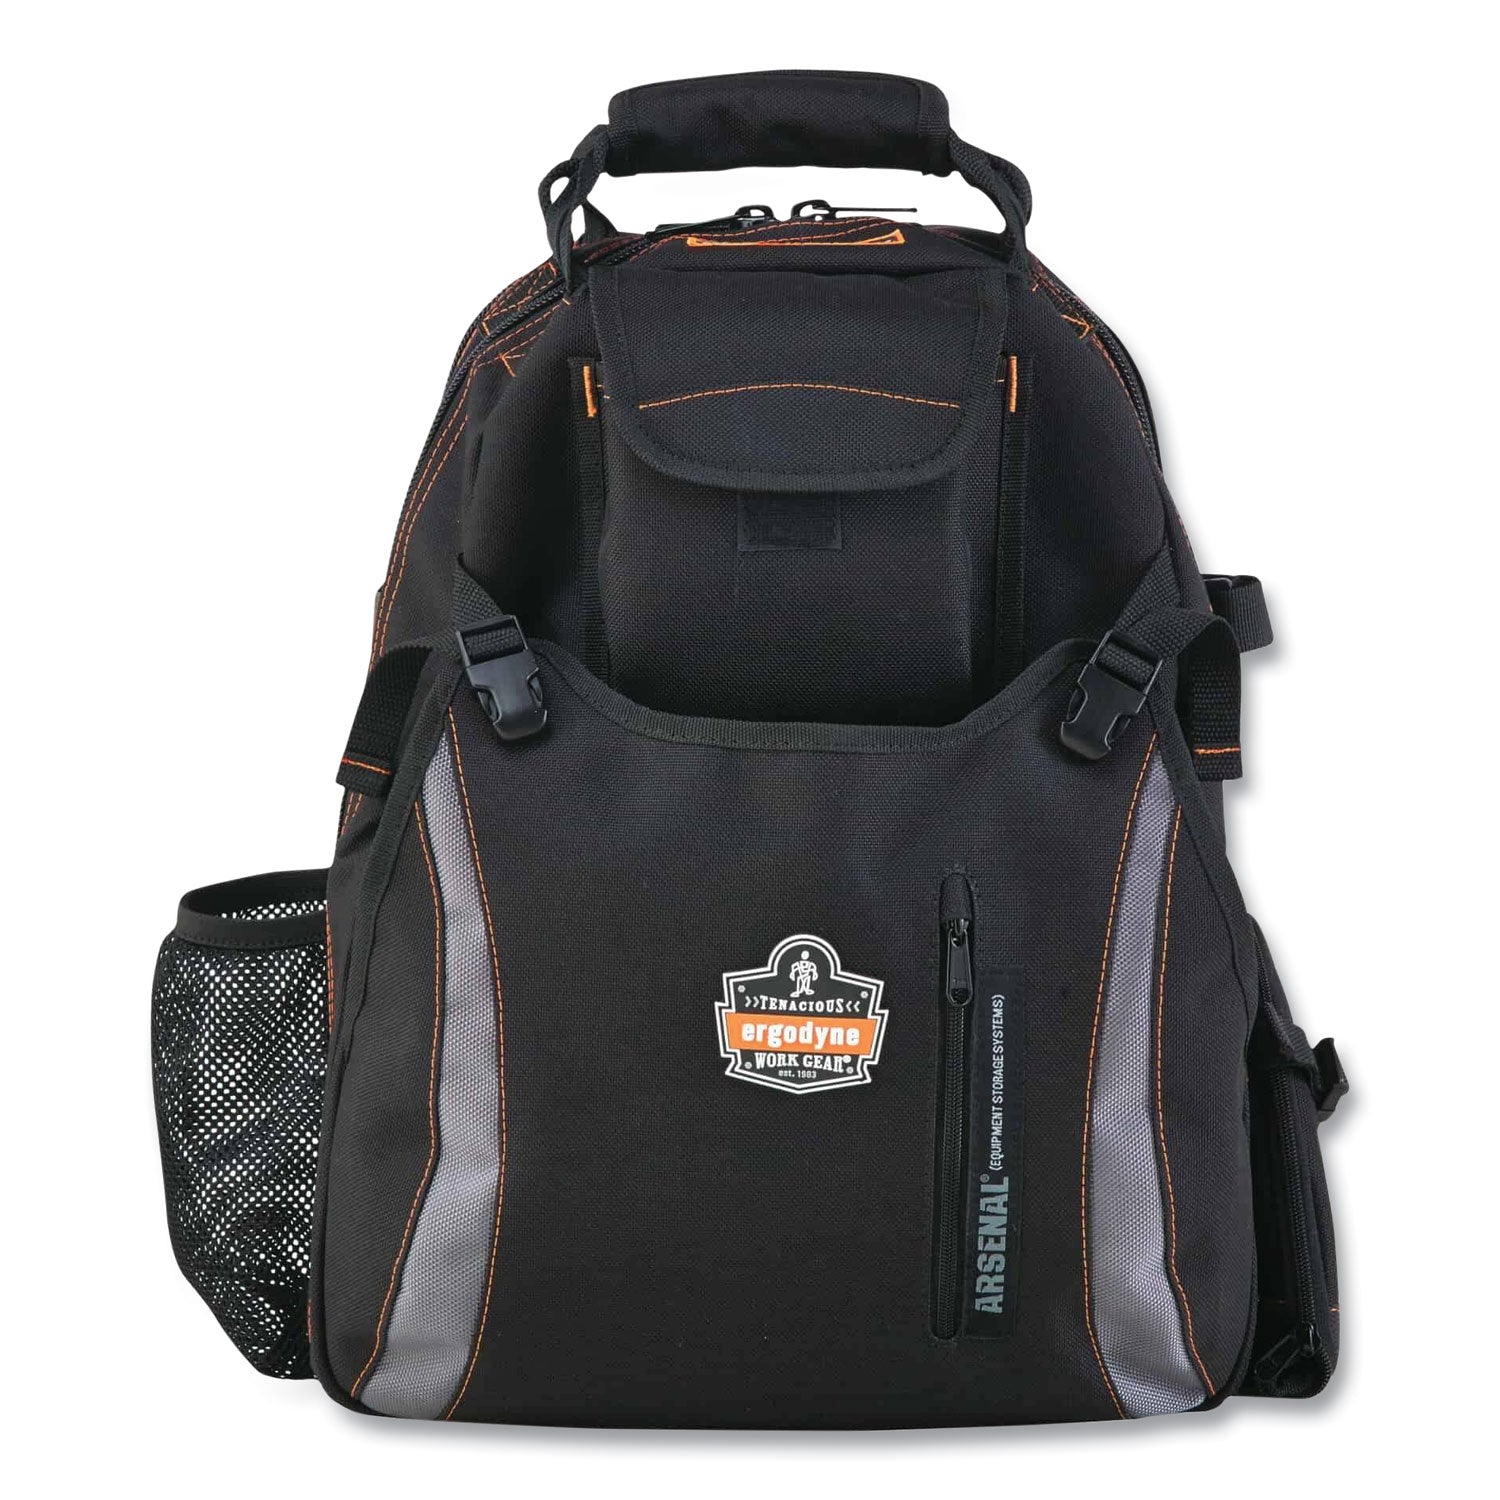 Arsenal 5843 Tool Backpack Dual Compartment, 26 Comp, 8.5x13.5x18, Ballistic Polyester, Black/Gray - Flipcost